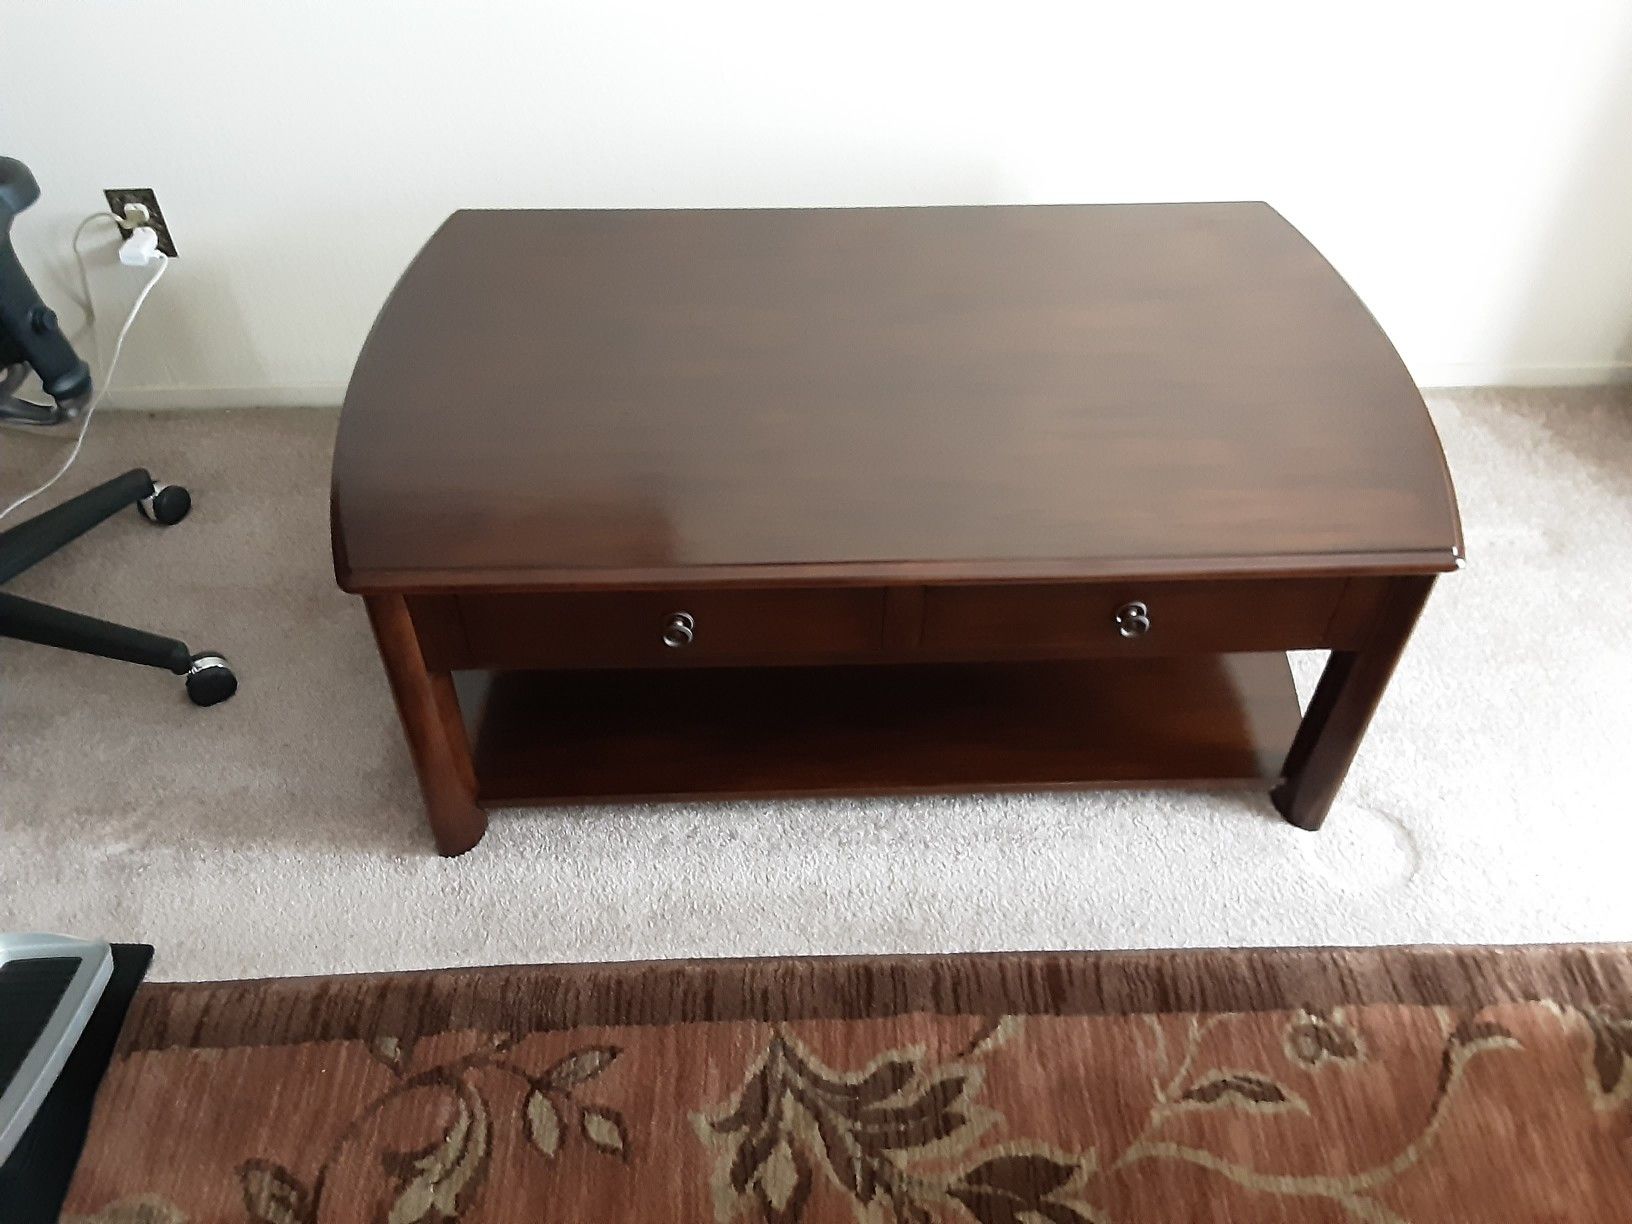 Bassett Coffee Table and One End Table